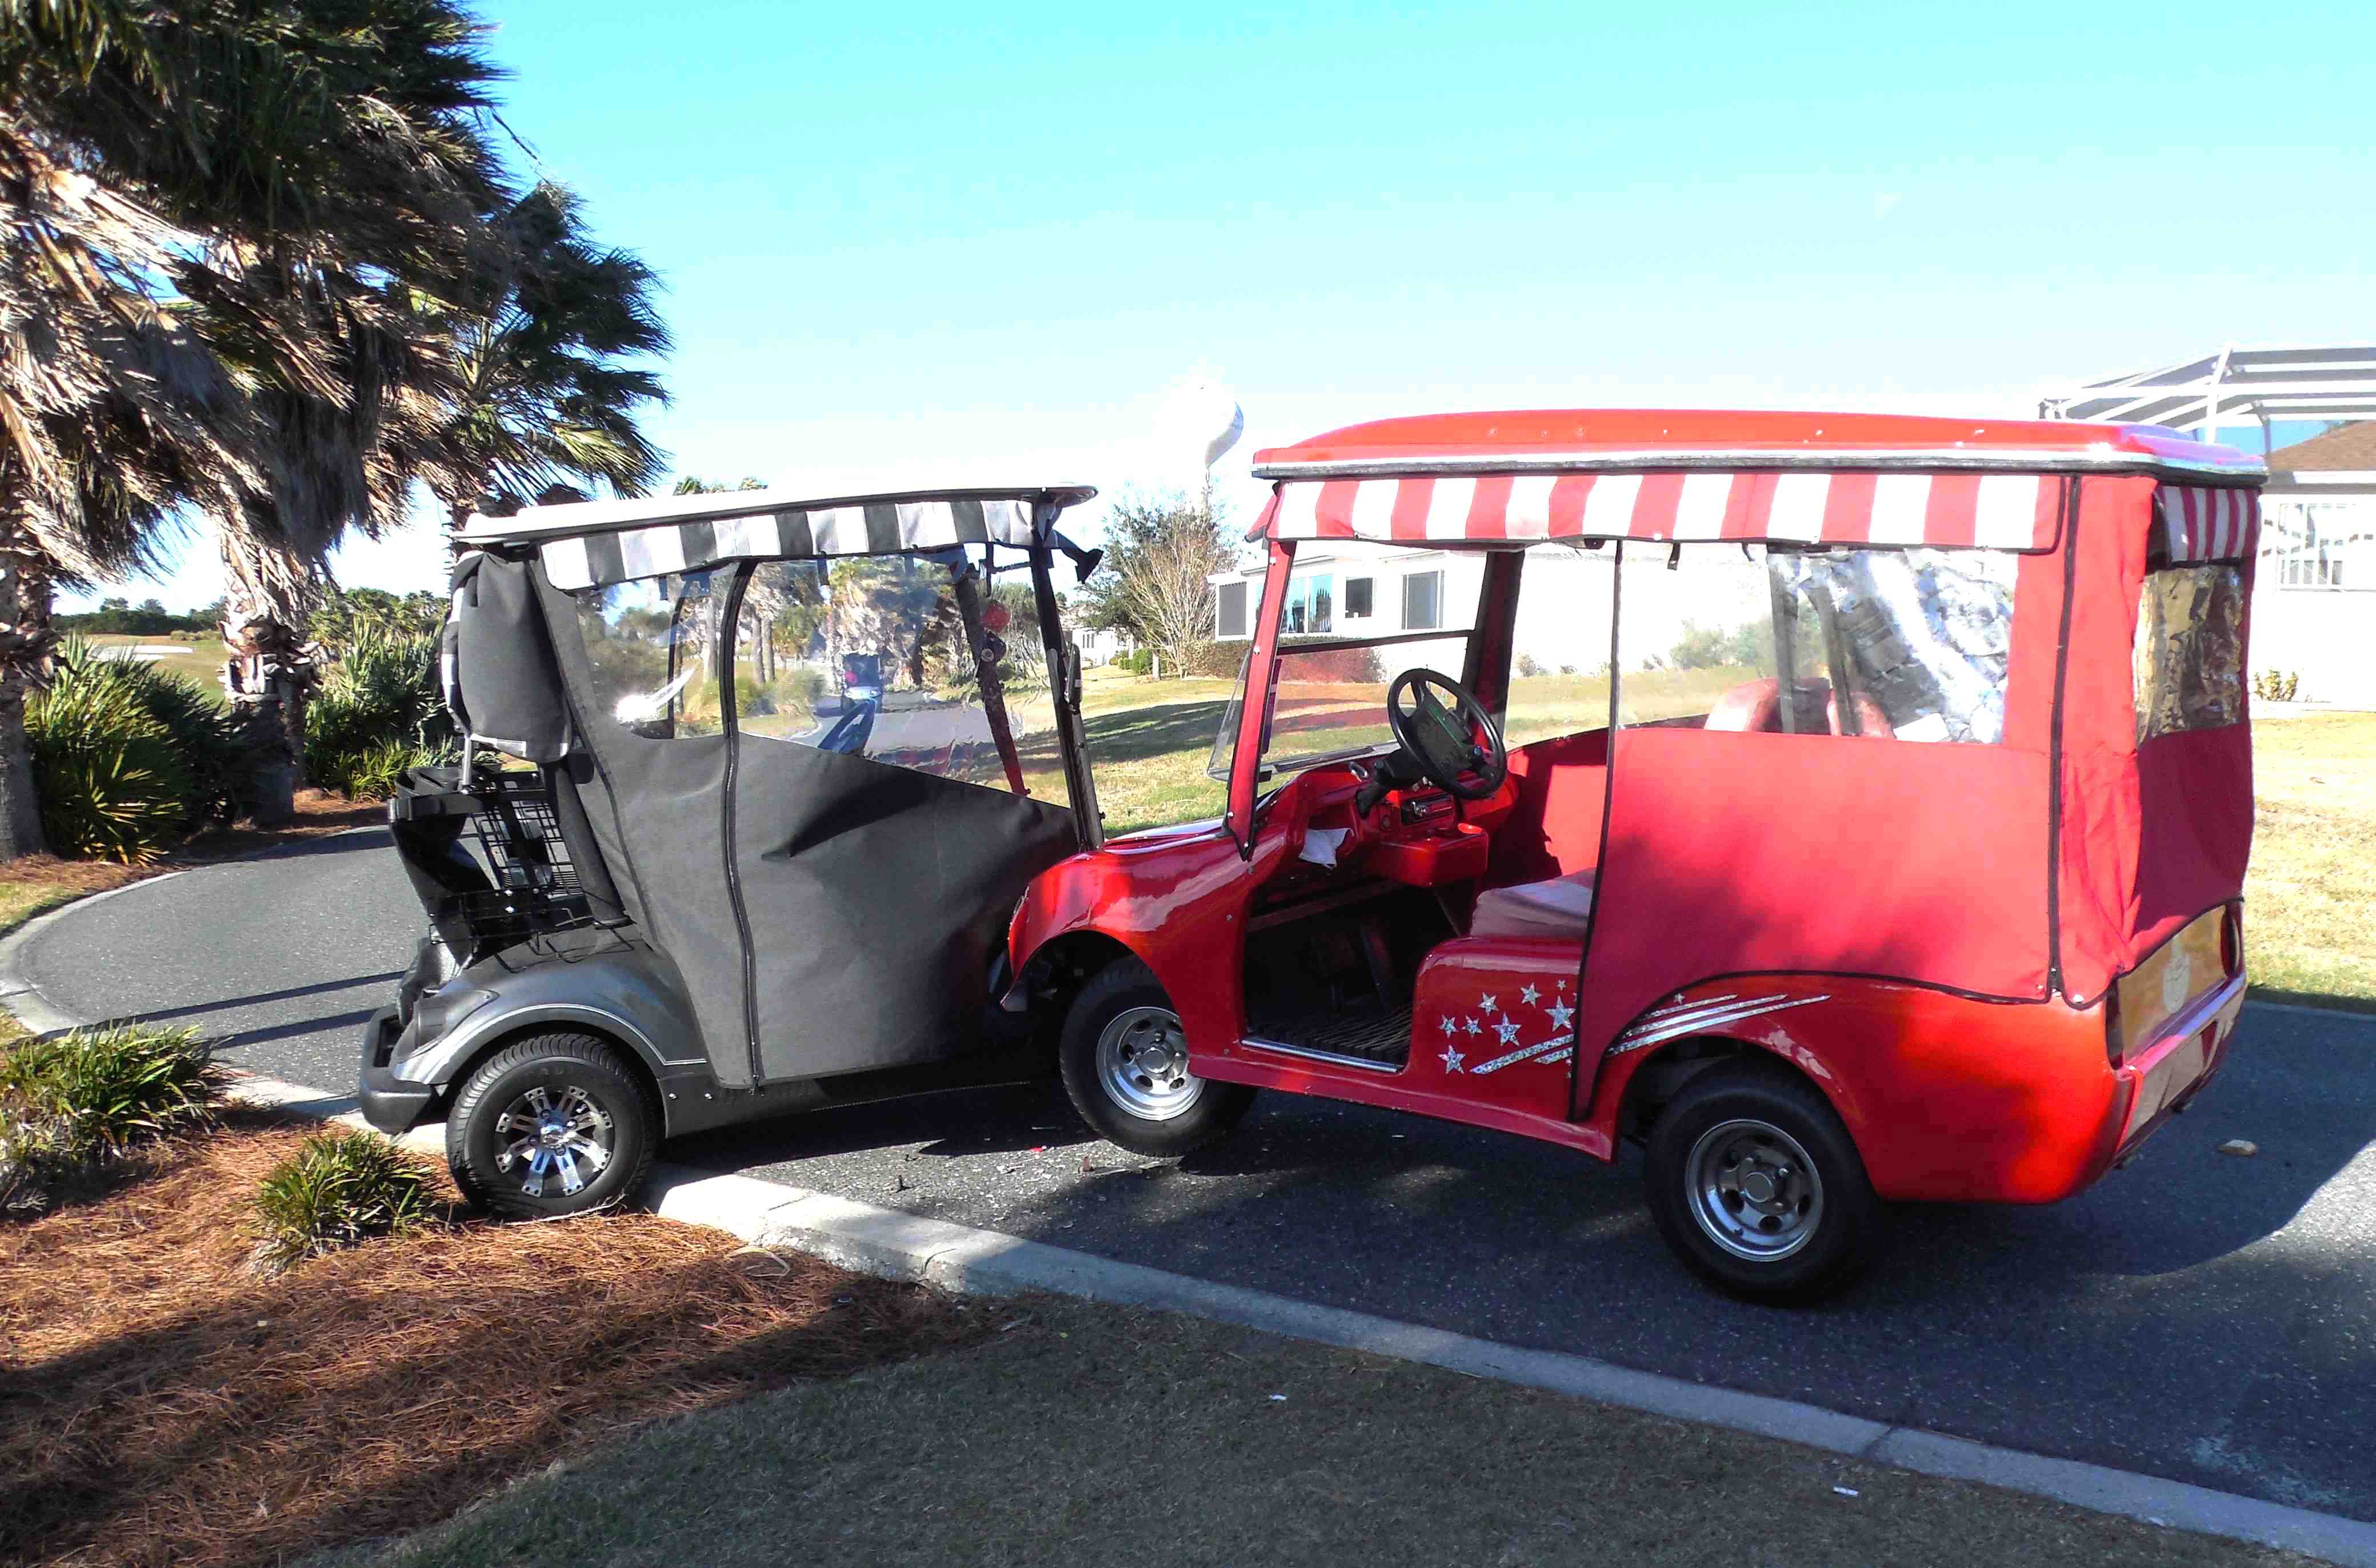 VHA golf cart clinics, video to stress personal responsibility on multi-modal paths